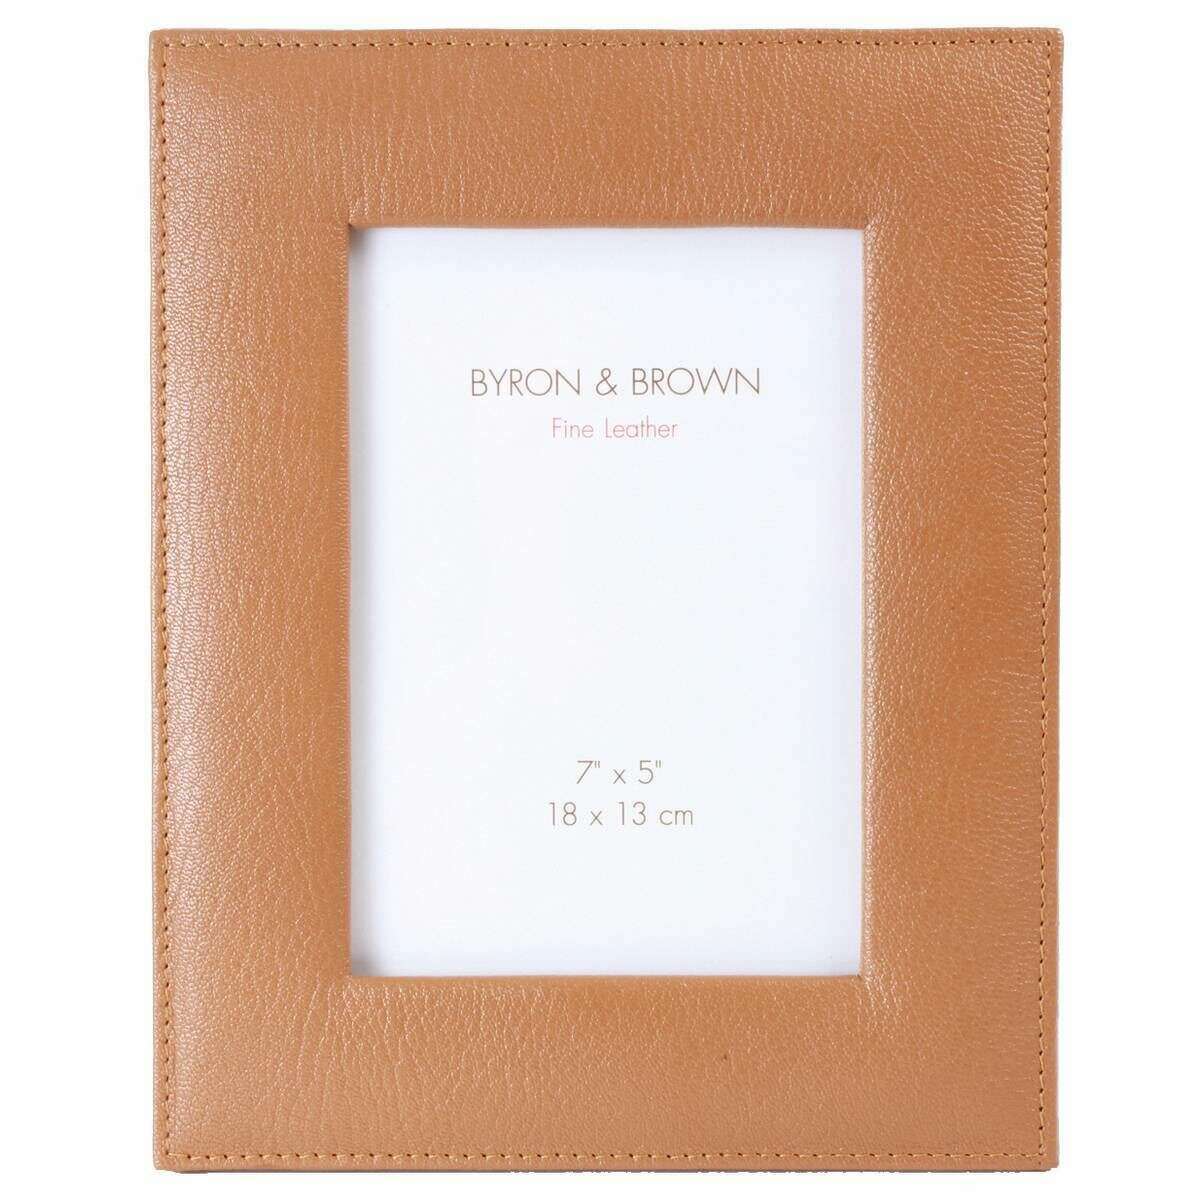 Byron and Brown Vintage Leather Photo Frame 7x5 - Tan